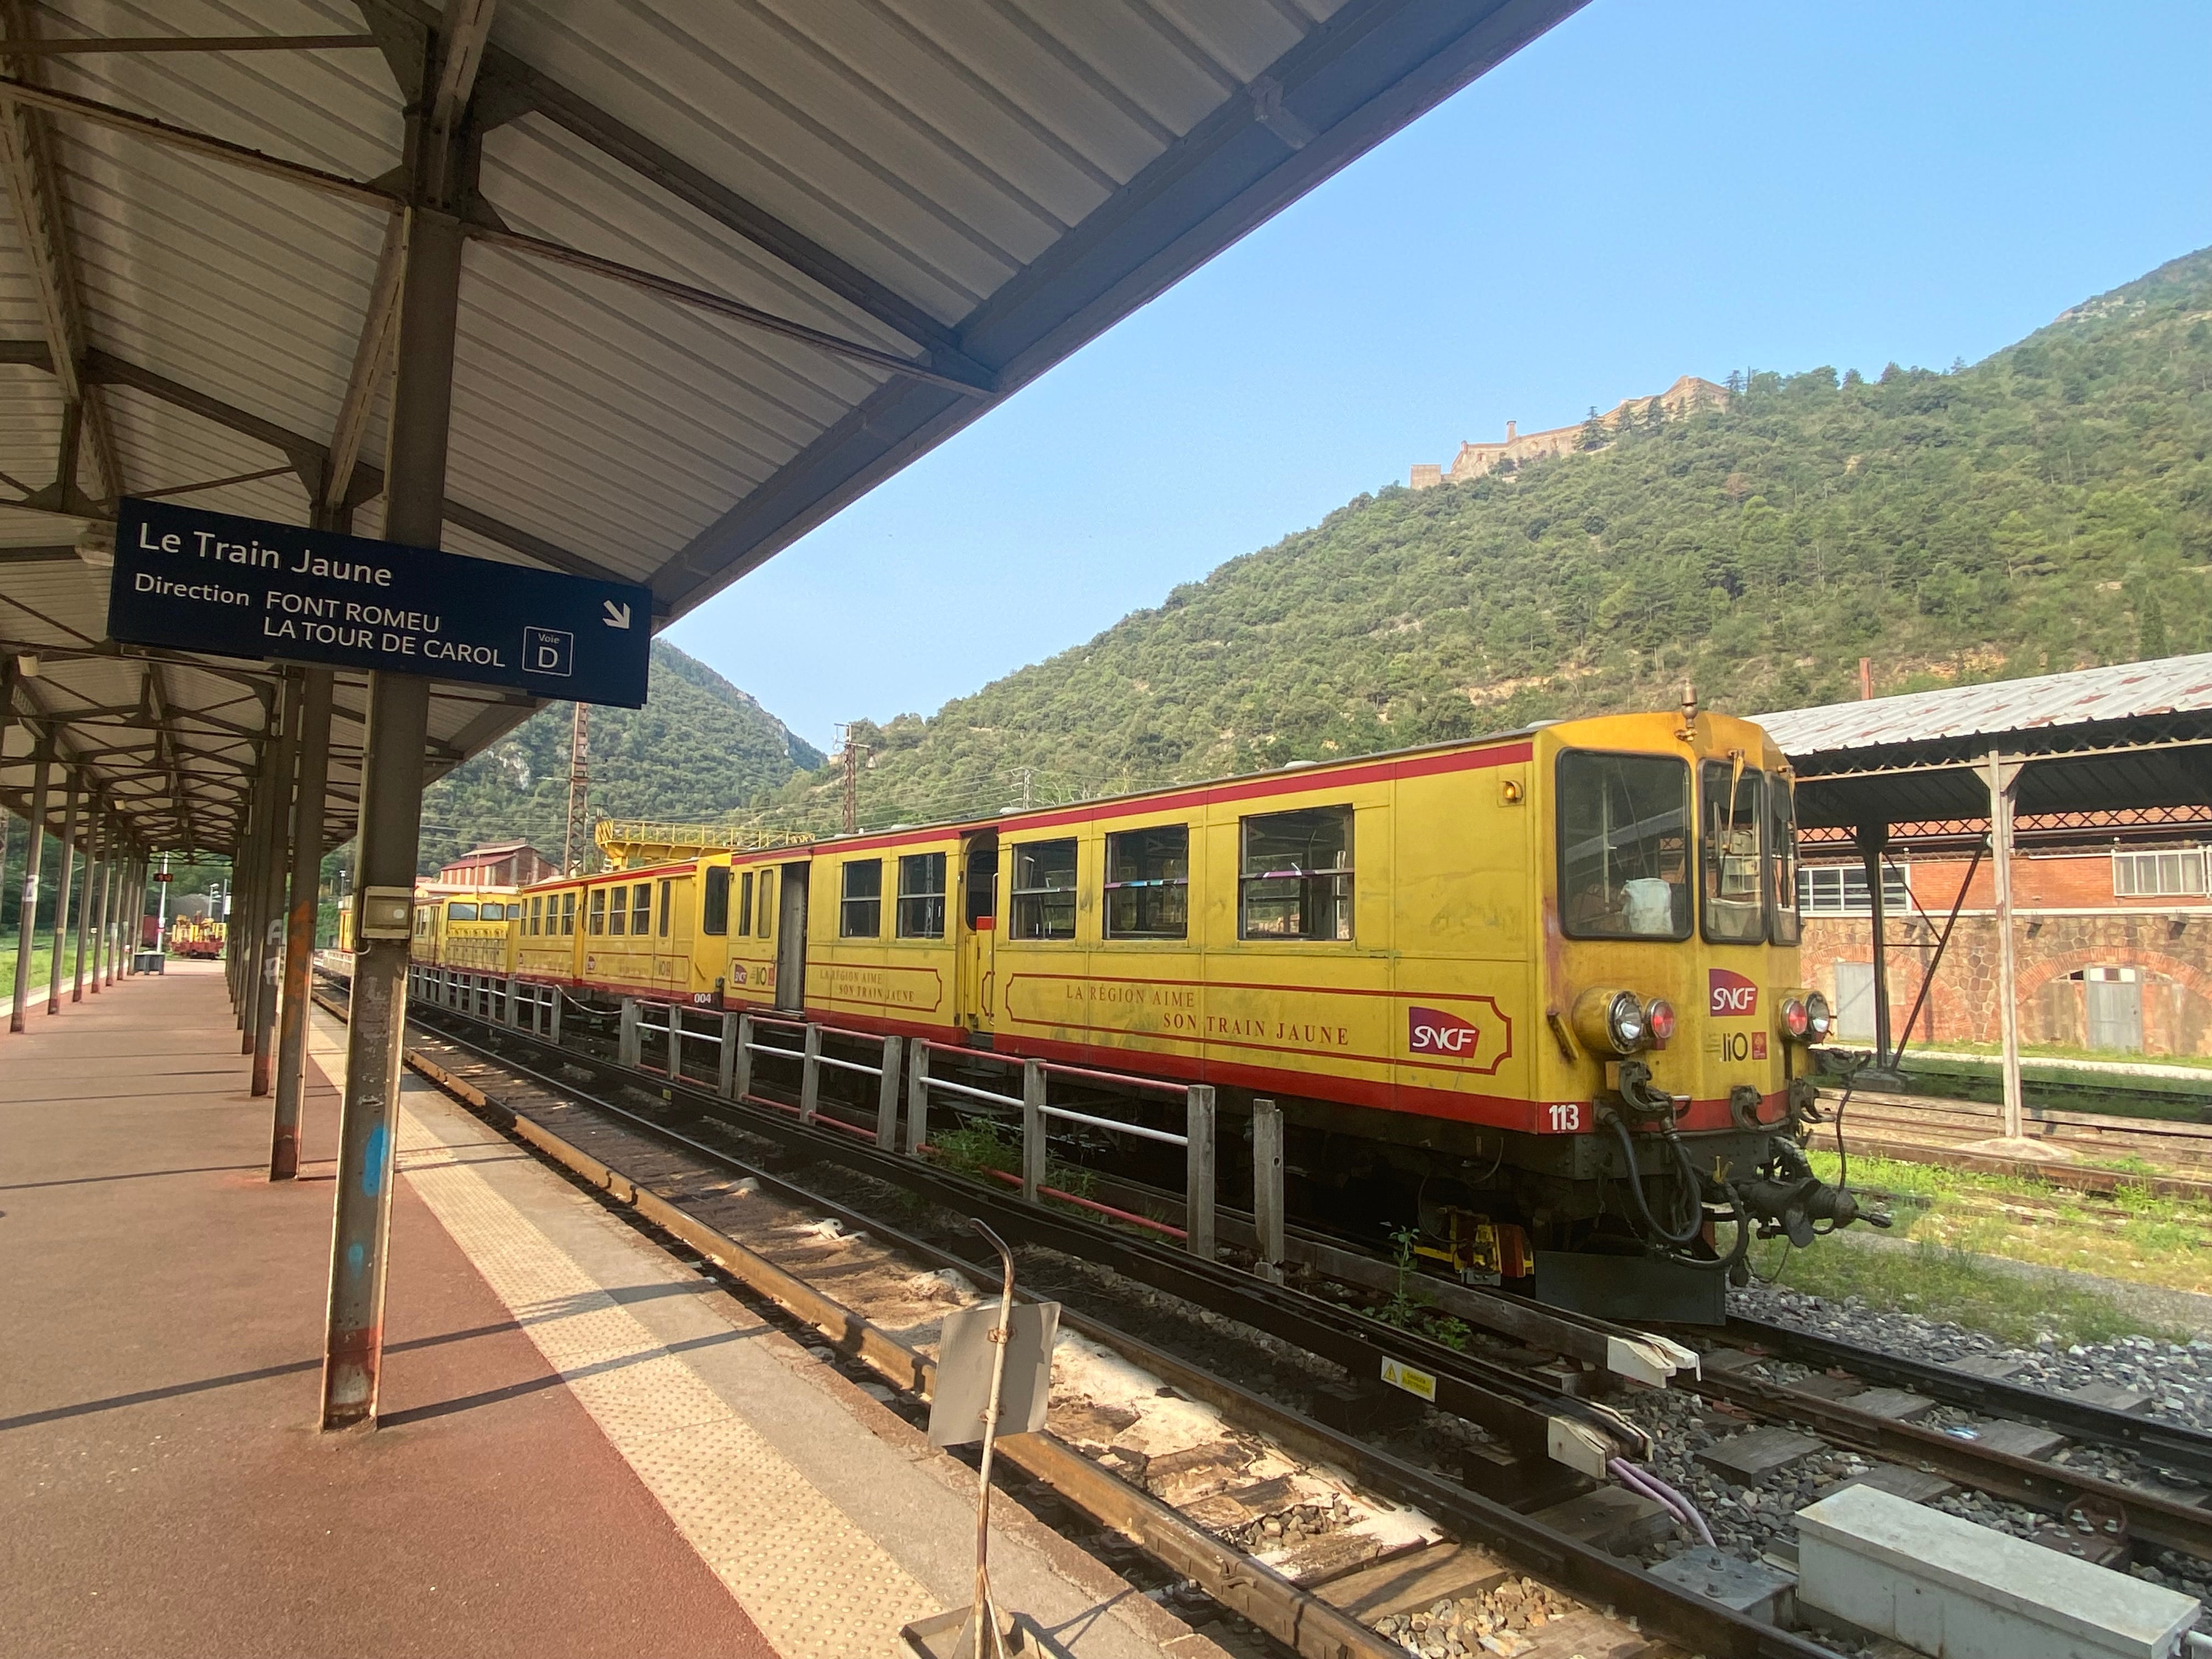 The Train Jaune has open-air carriages in summertime